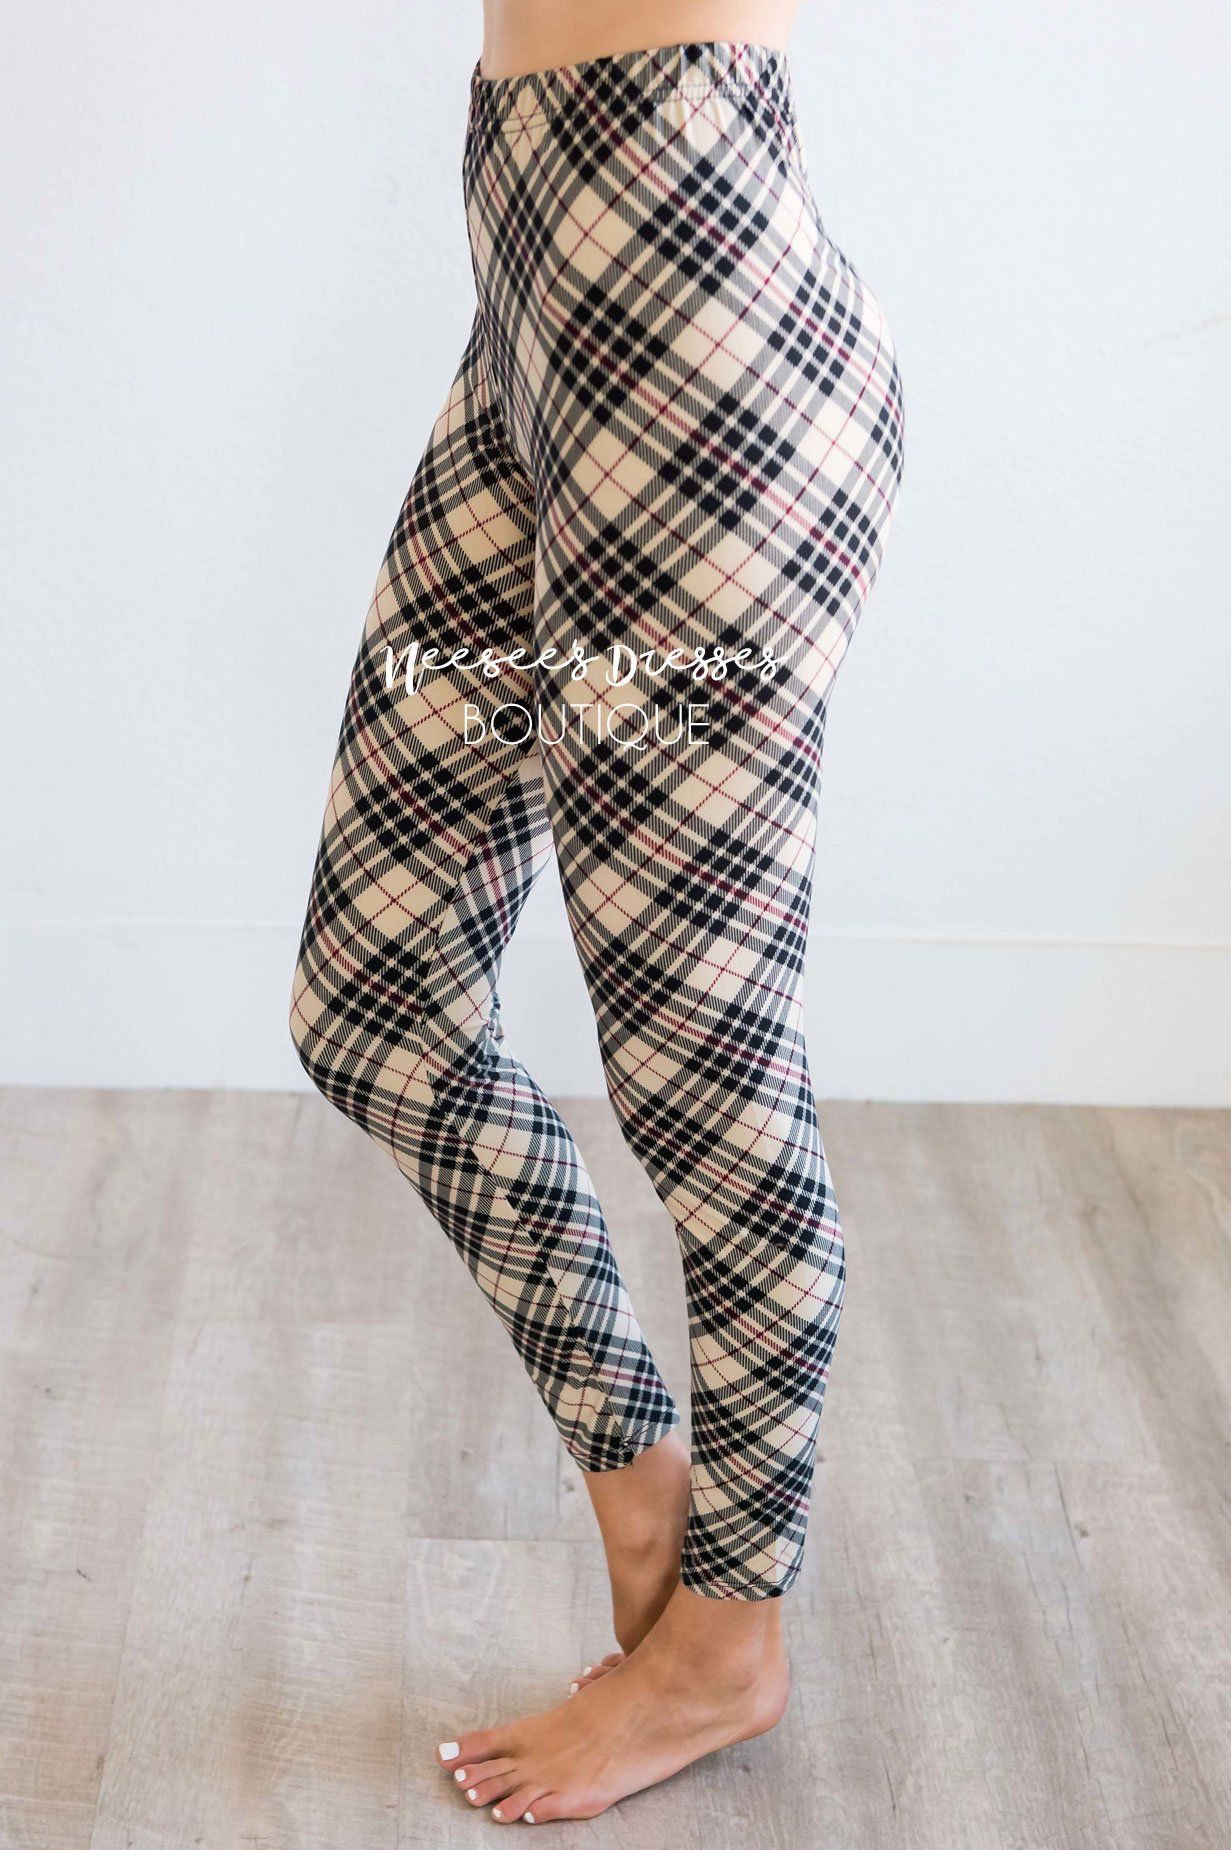  Women's Leggings - Beige / Women's Leggings / Women's Clothing:  Clothing, Shoes & Jewelry